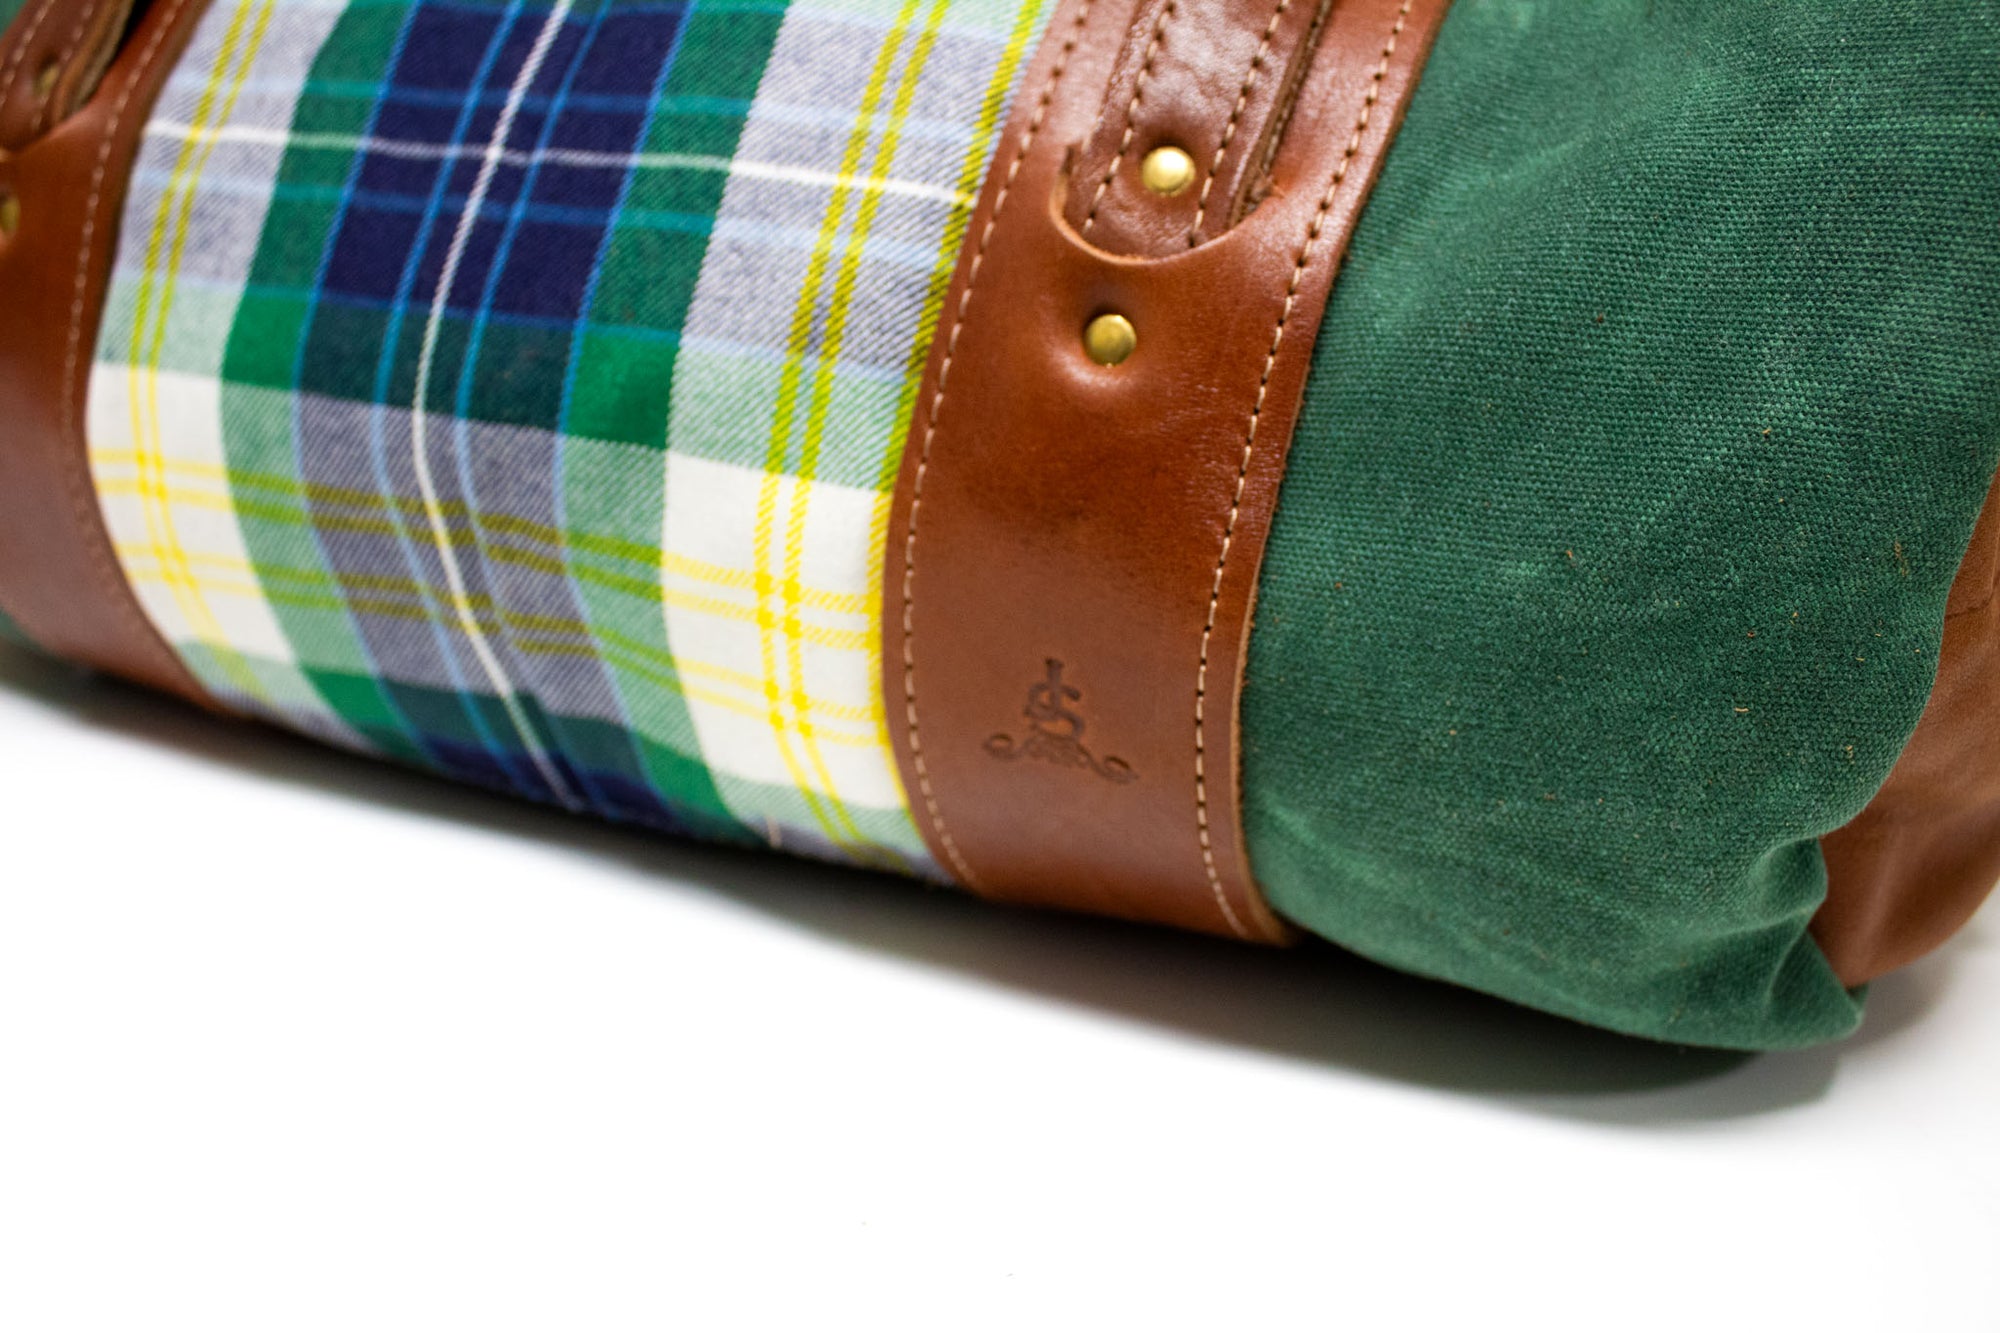 Fitzpatrick Tartan and Chestnut Leather Club Duffel Bag- Steurer & Jacoby